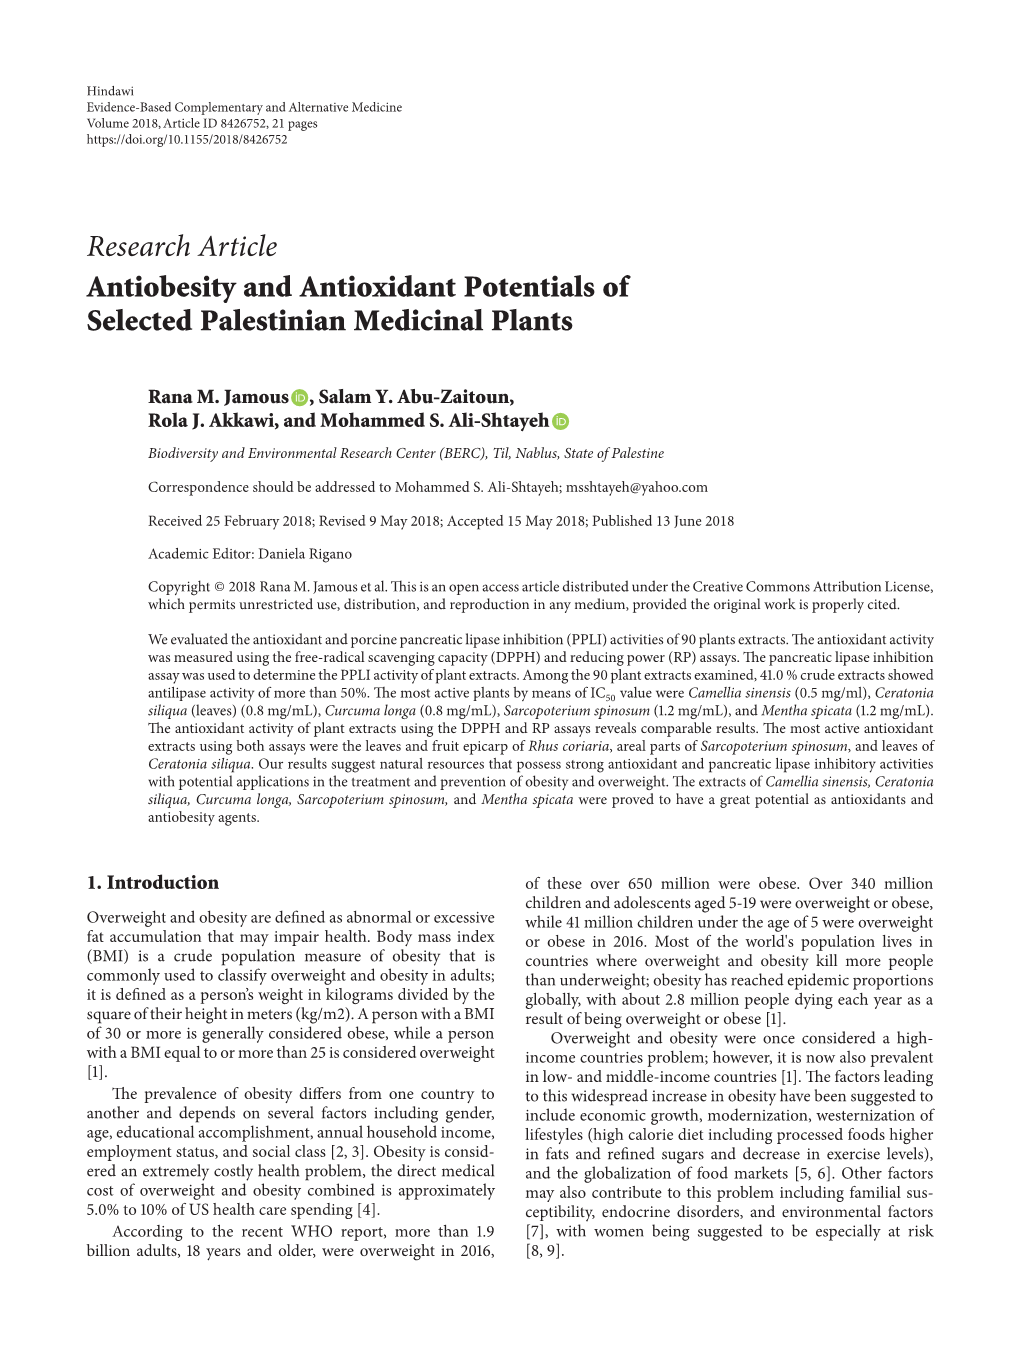 Research Article Antiobesity and Antioxidant Potentials of Selected Palestinian Medicinal Plants